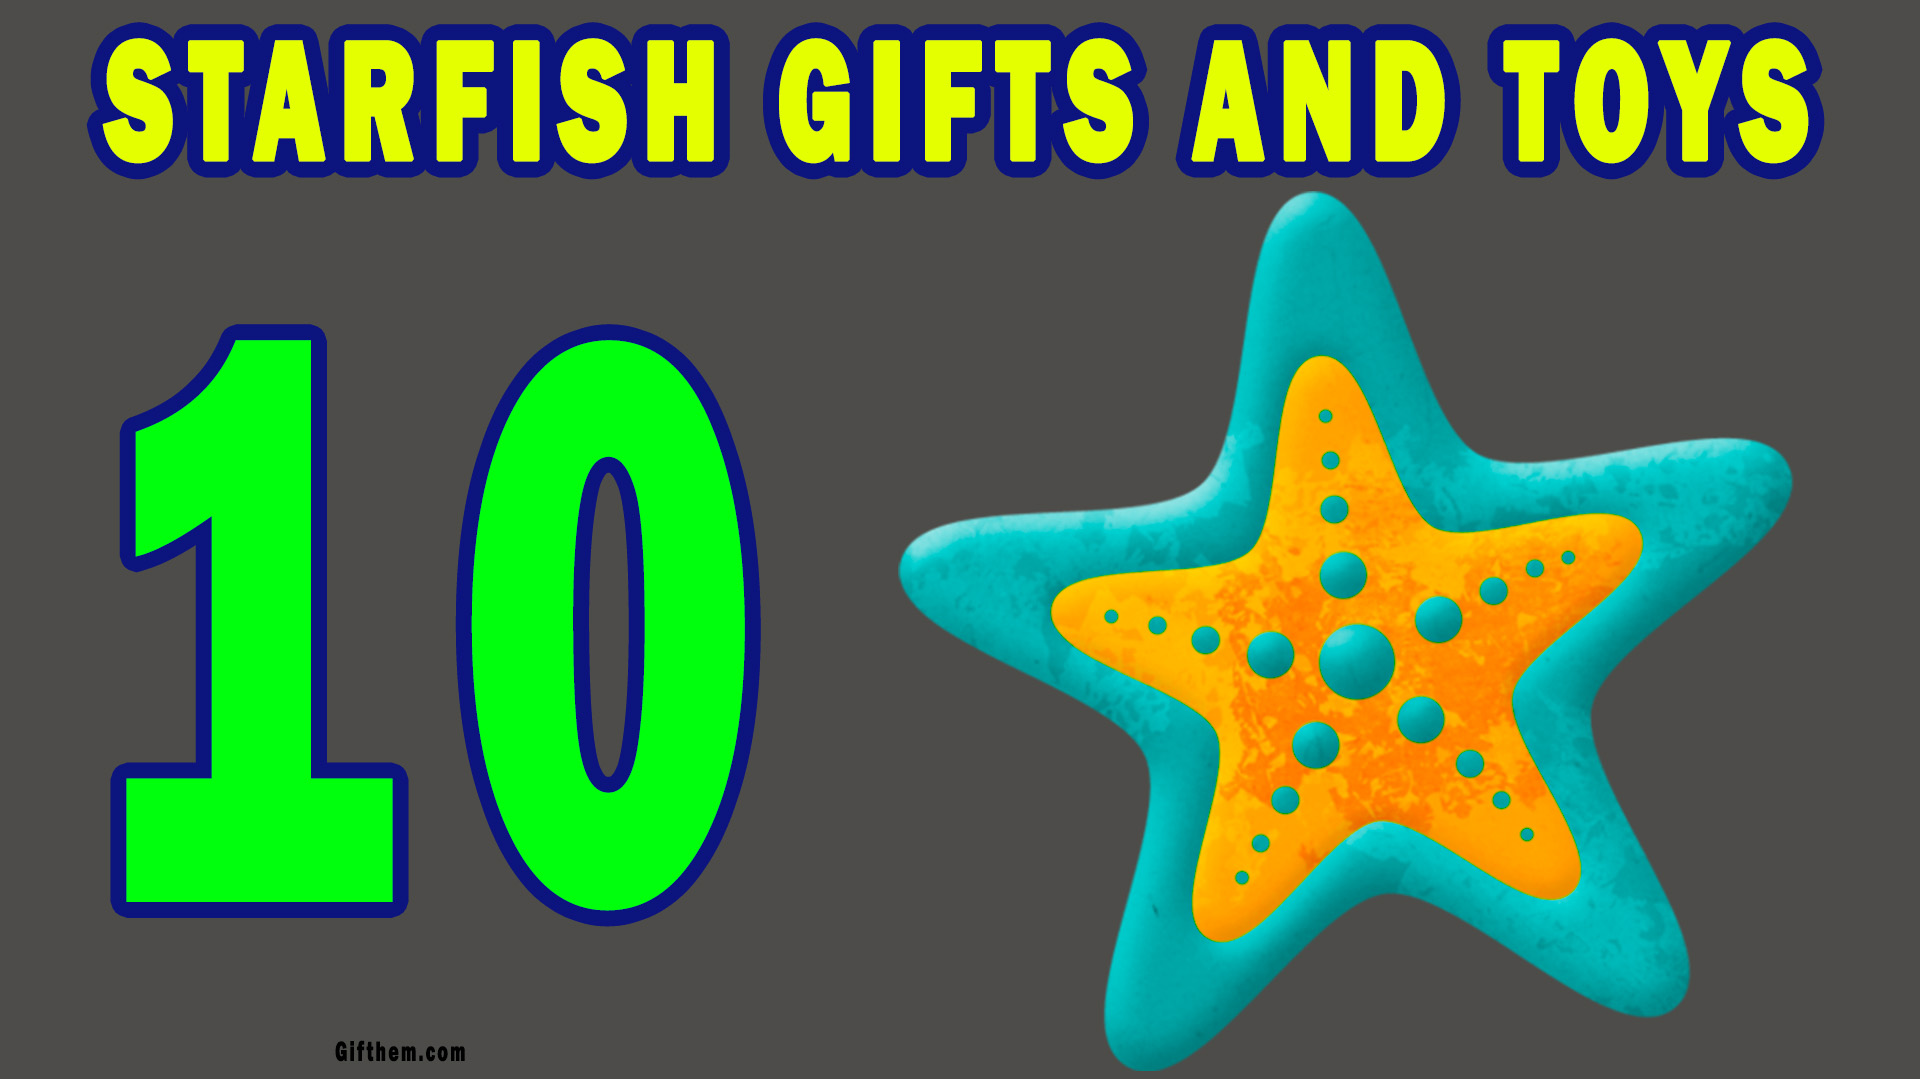 Top Starfish Gifts & Toys